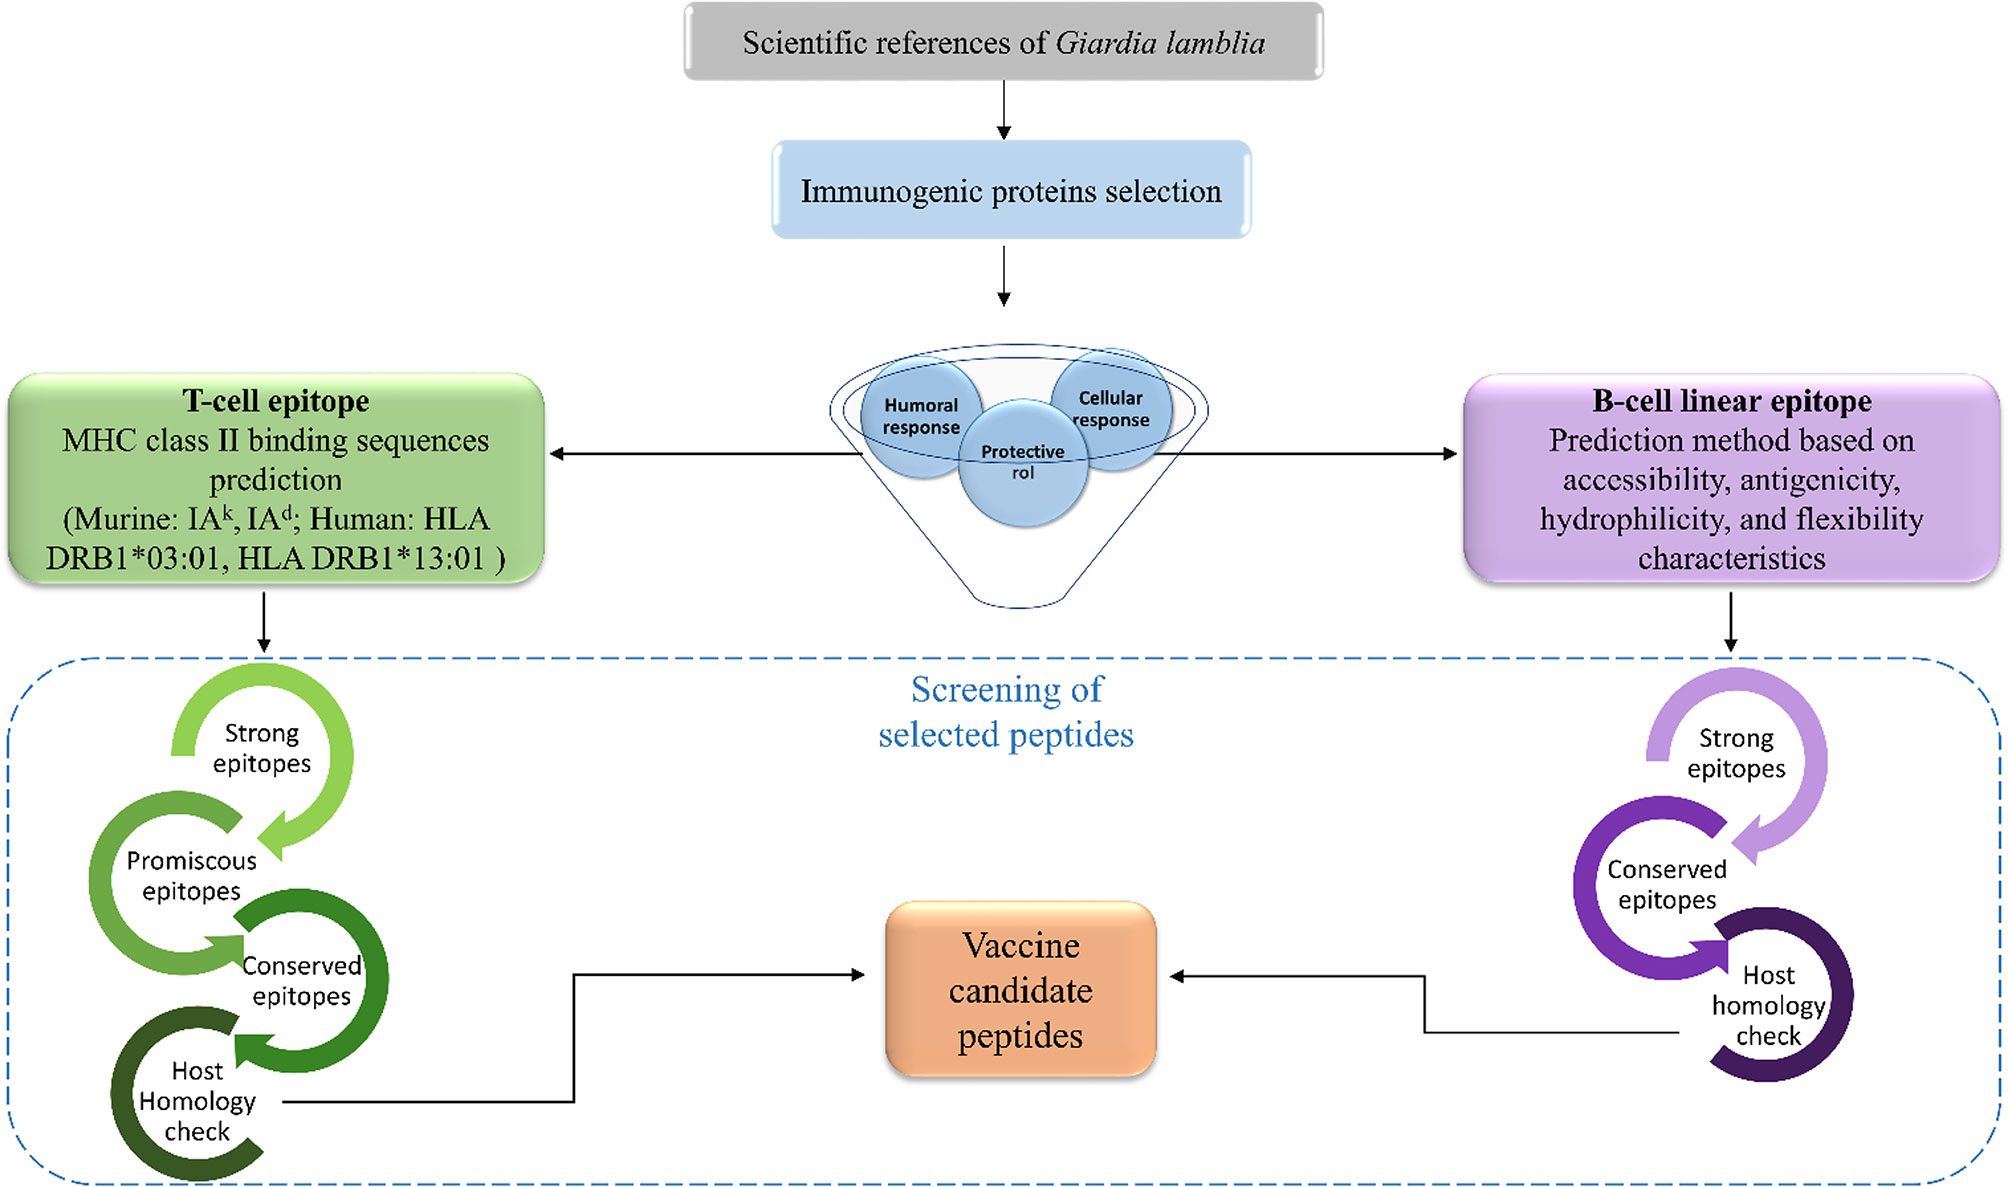 Frontiers | “Immunoinformatic Identification of T-Cell and B-Cell Epitopes  From Giardia lamblia Immunogenic Proteins as Candidates to Develop  Peptide-Based Vaccines Against Giardiasis”